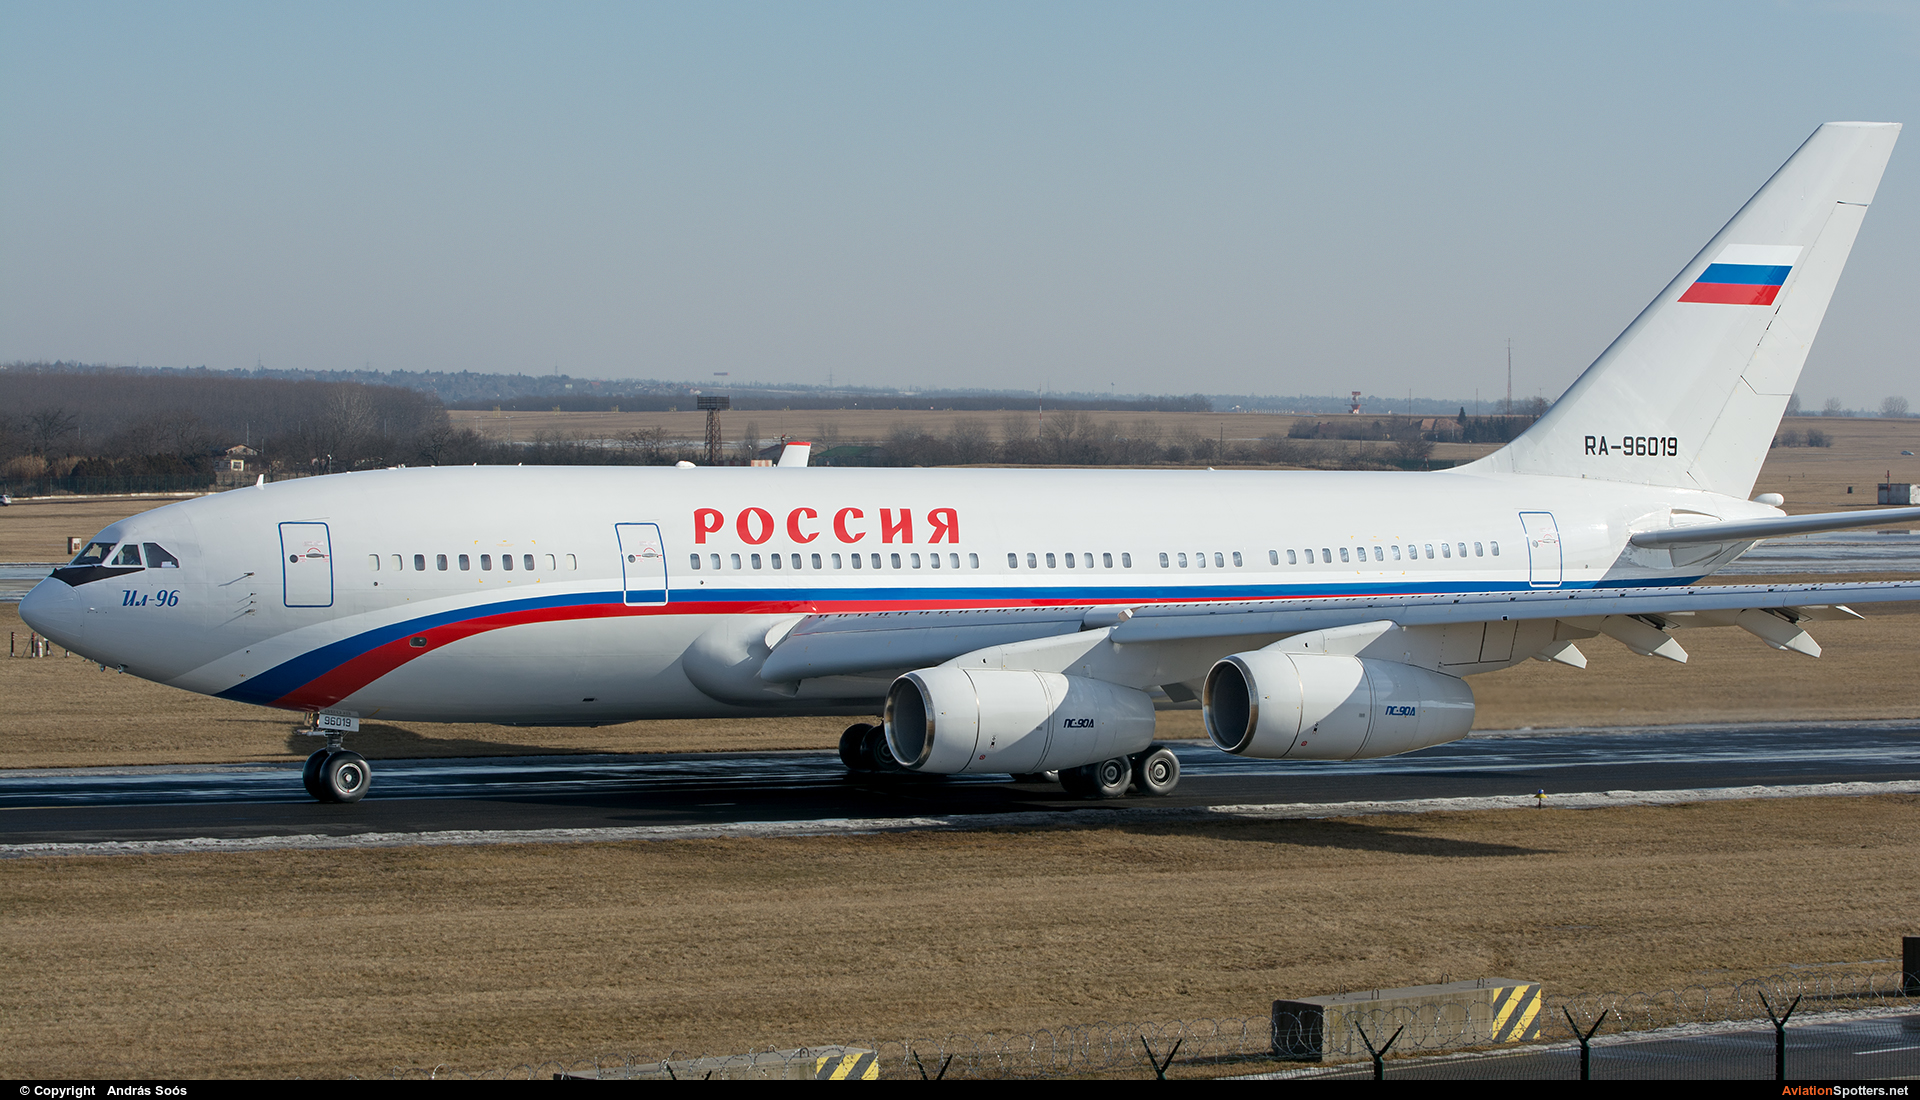 Rossiya Airlines  -  Il-96  (RA-96019) By András Soós (sas1965)